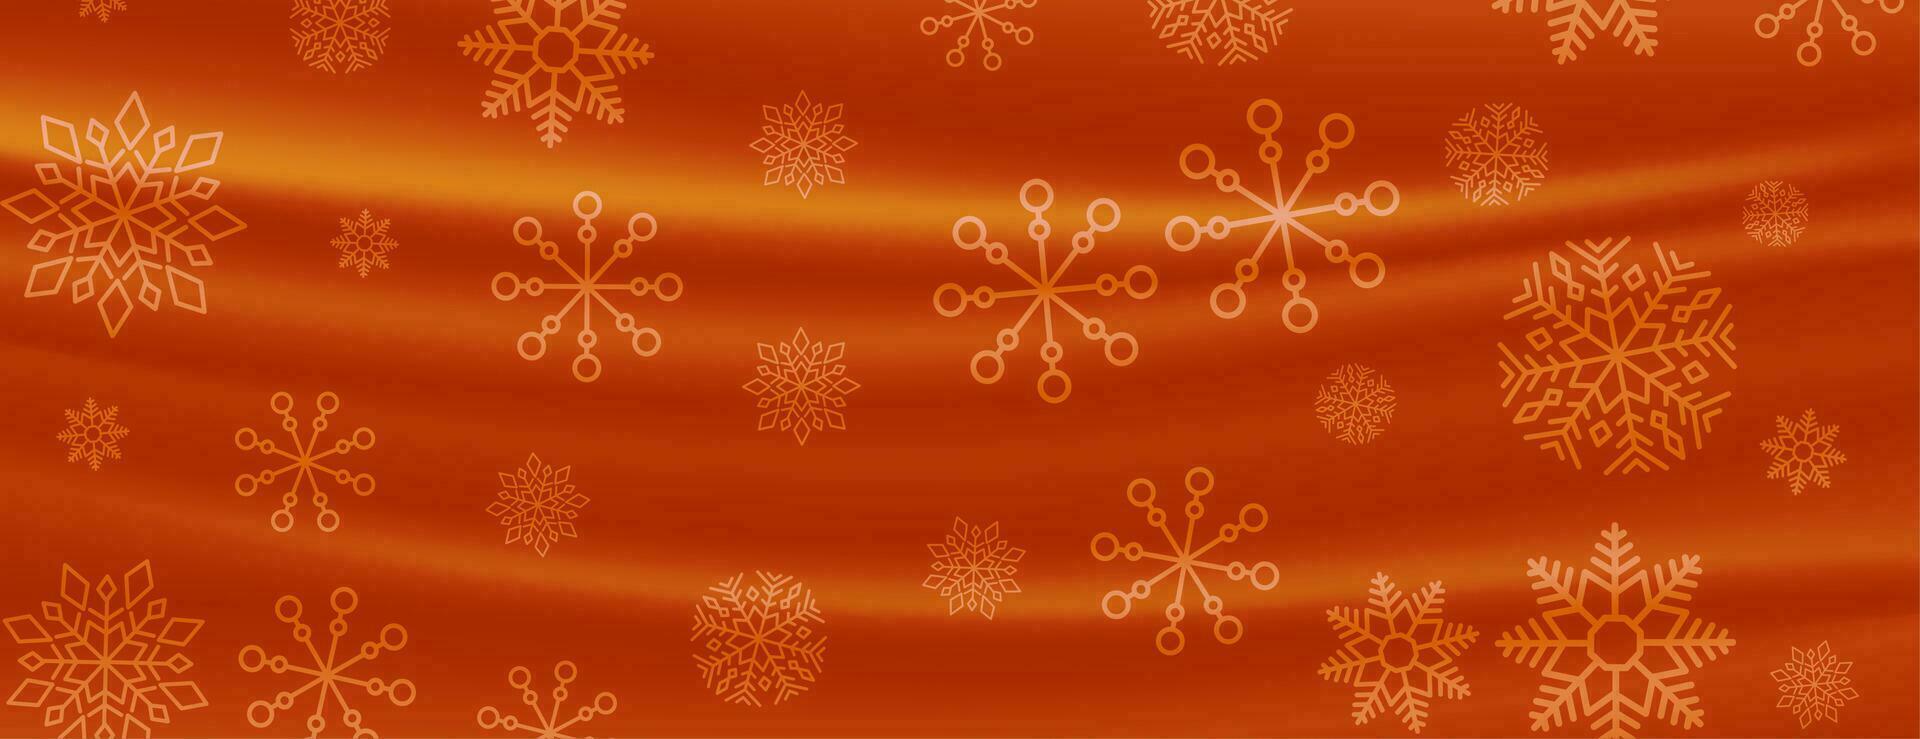 curtain style merry christmas snowflakes banner vector